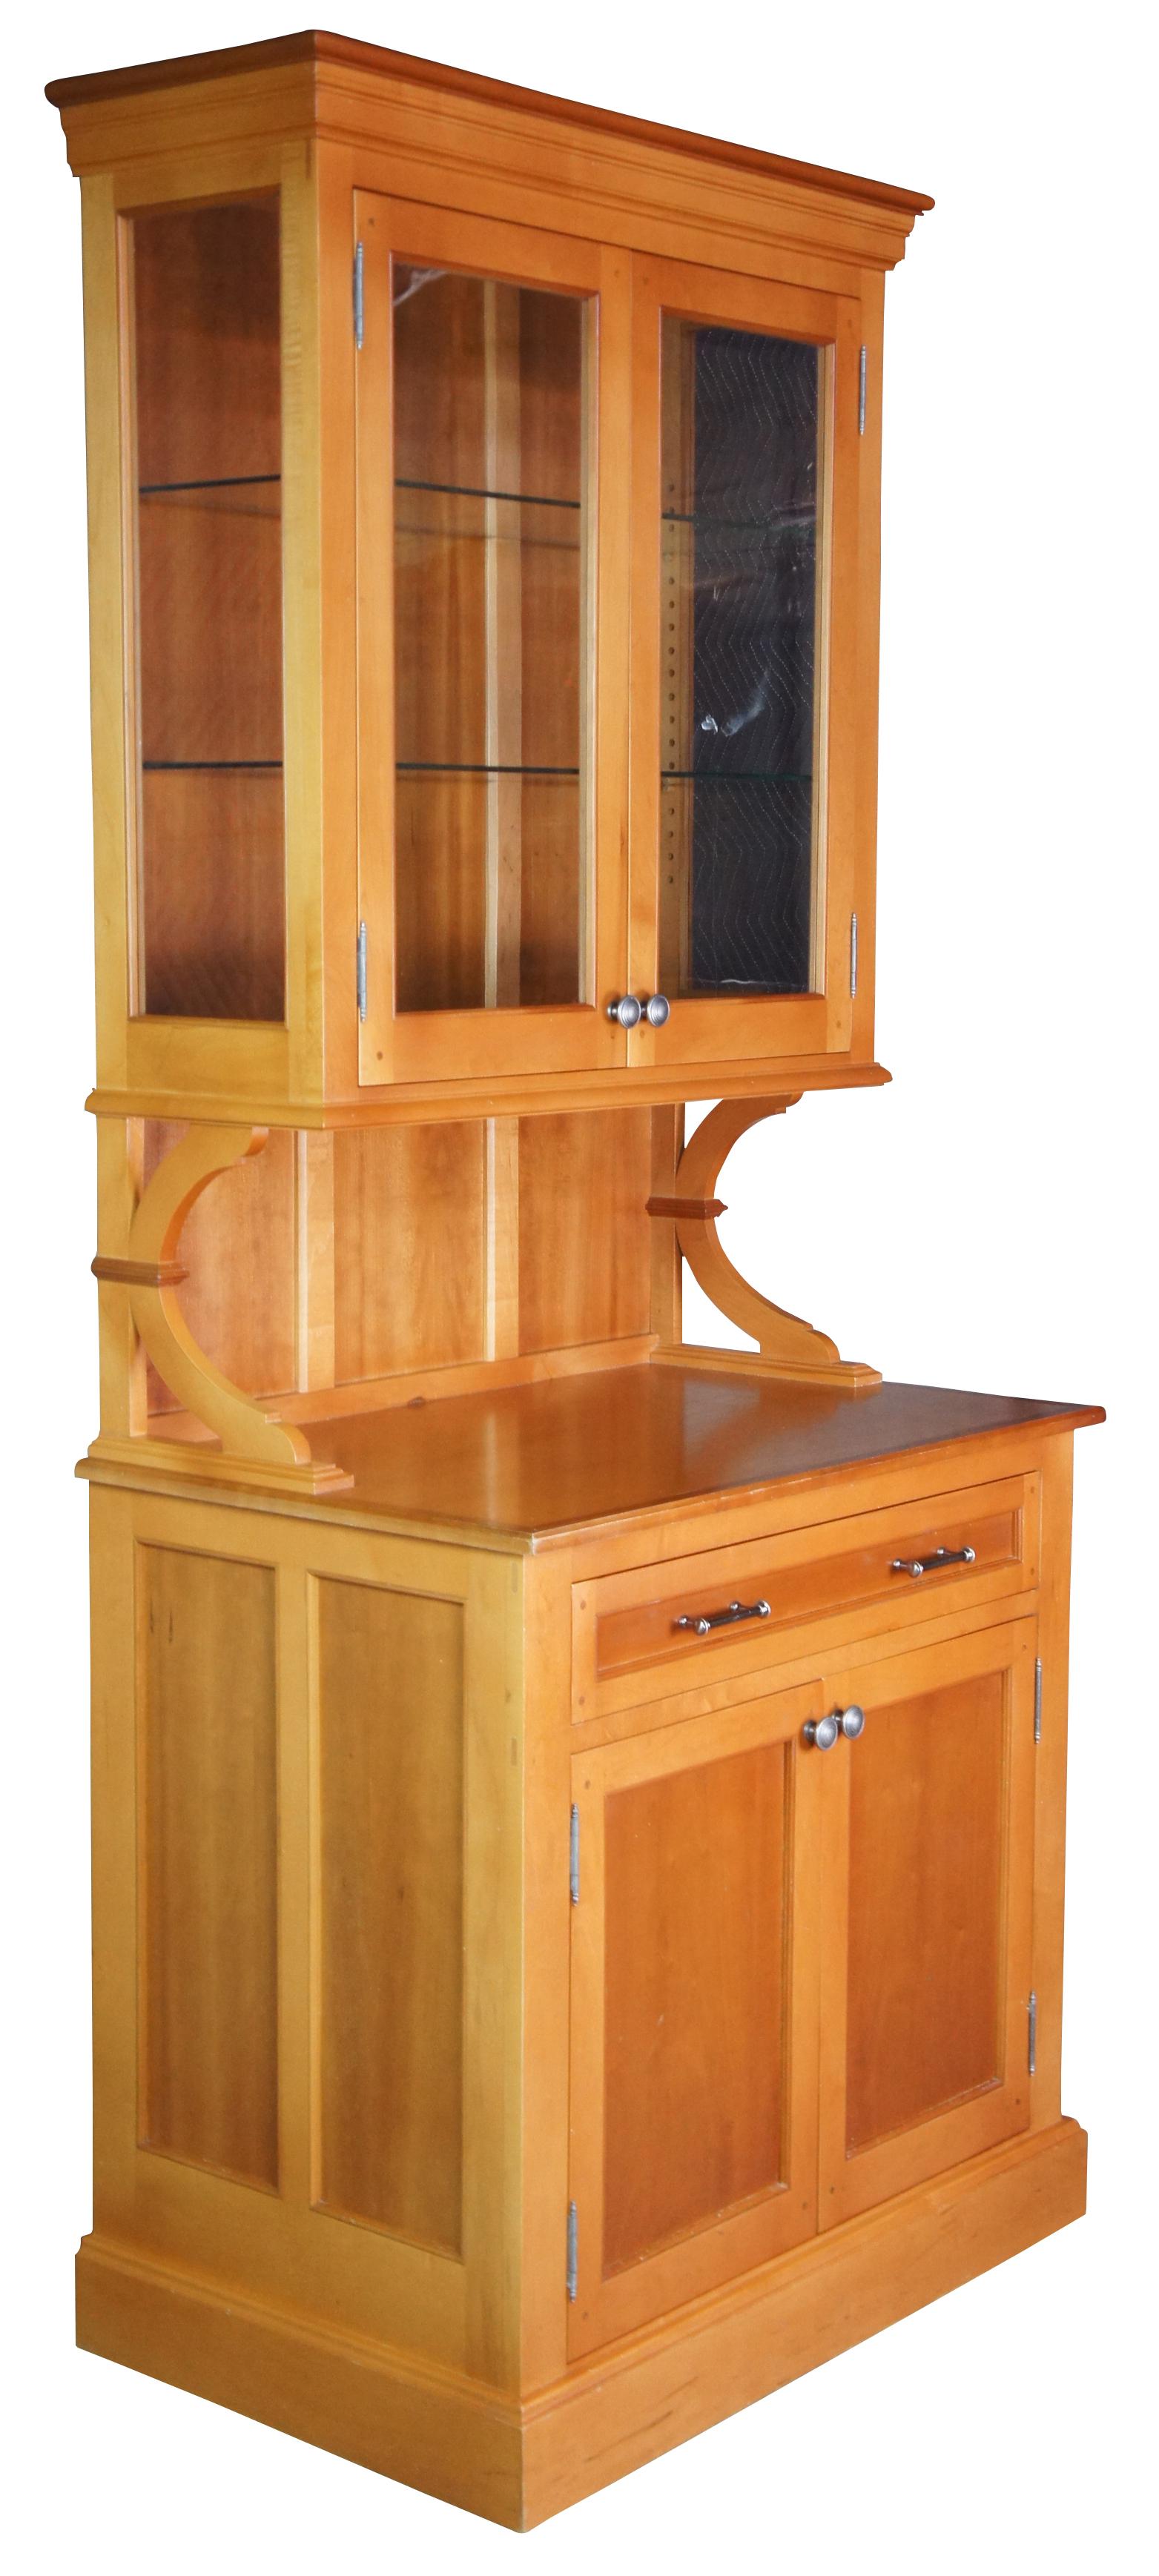 Vintage modern hutch, bar back or server. Made of maple featuring one drawer, paneled sides with lower cabinet and upper glass curio or china display. One piece, does not break down.

36